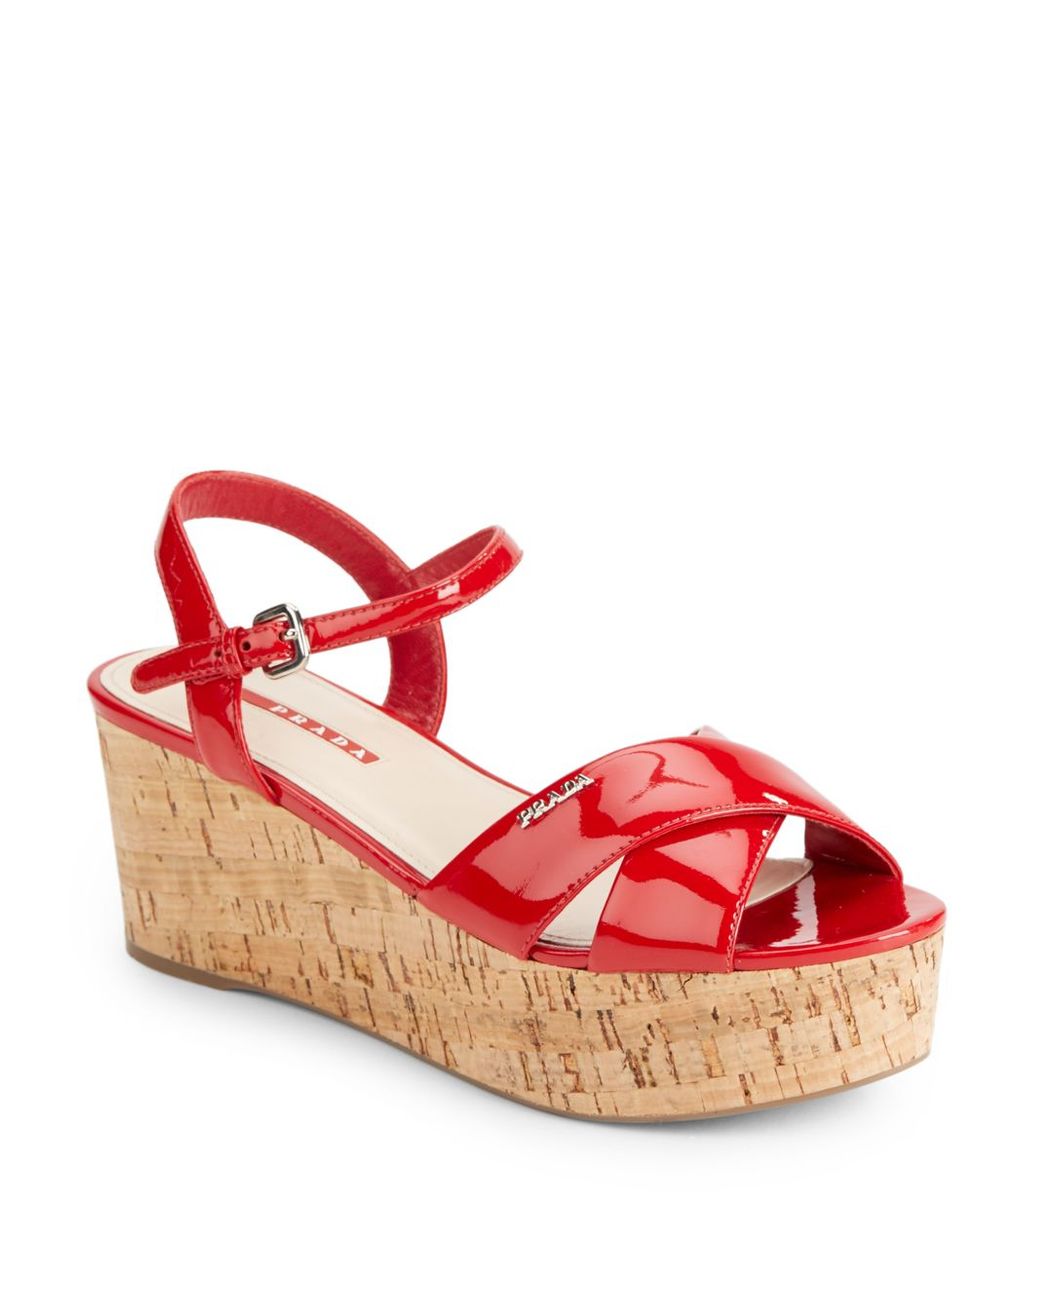 Prada Patent Leather Cork Wedge Sandals in Red | Lyst